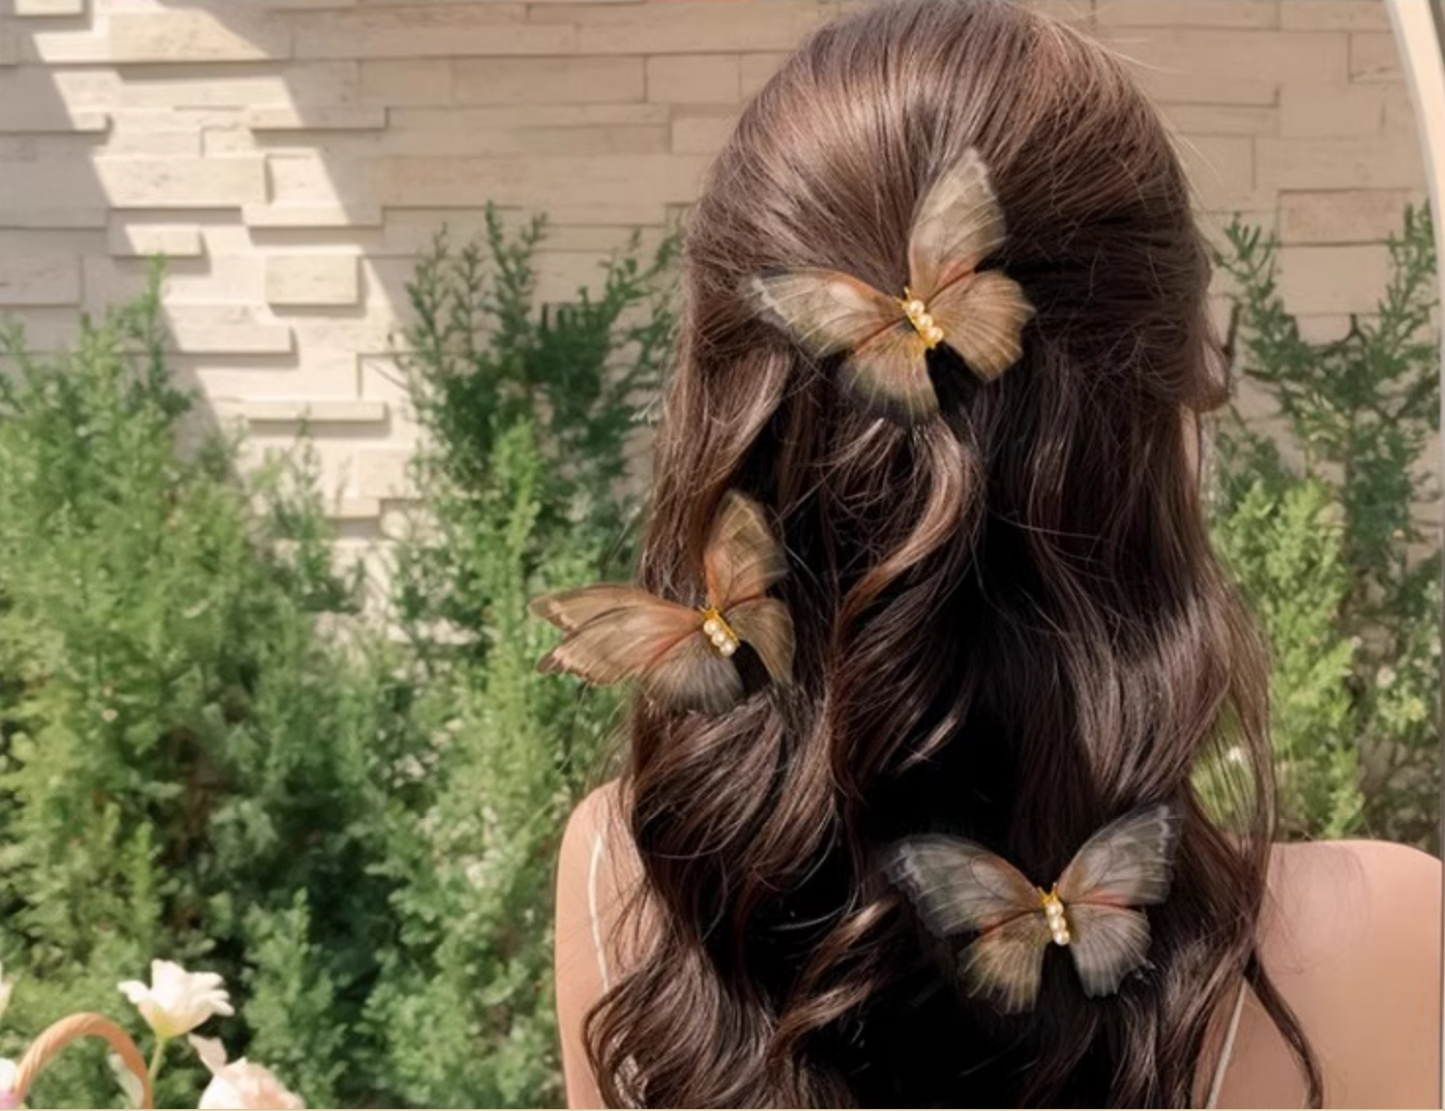 Butterfly hairpin 3213